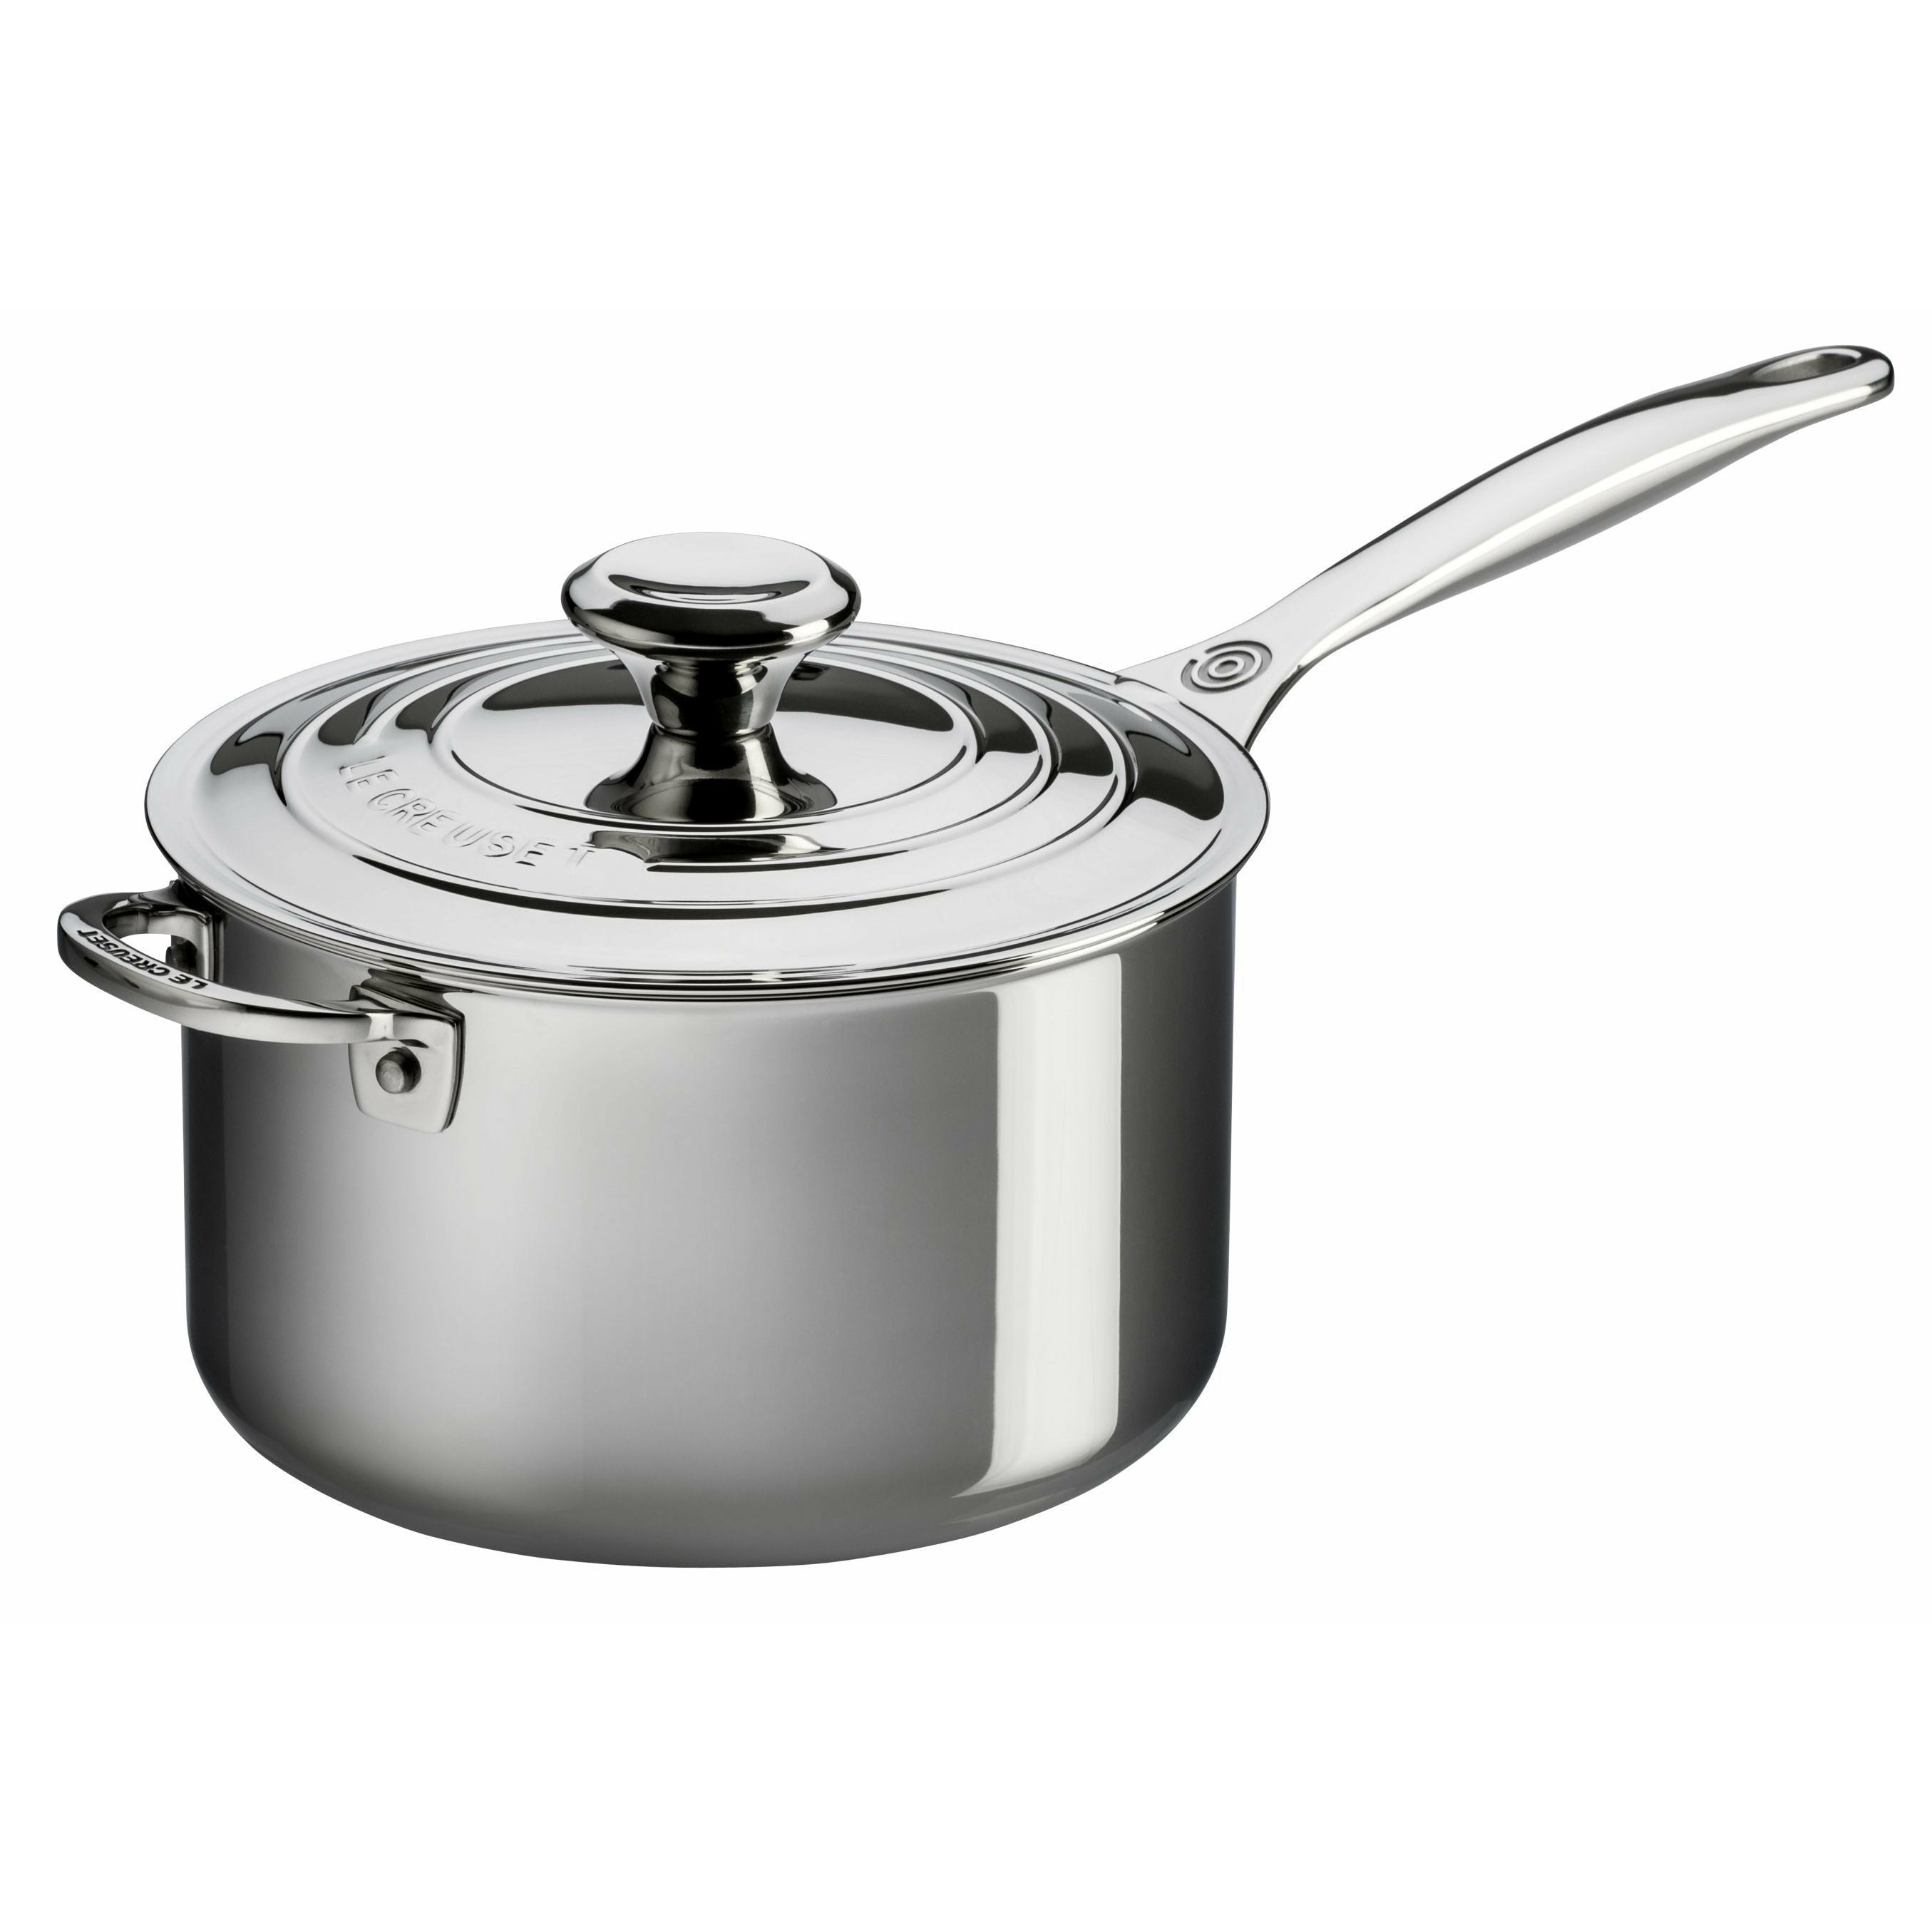 Le Creuset Signature Stainless Steel Saucepan 3.8 L With Lid & Helper Handle